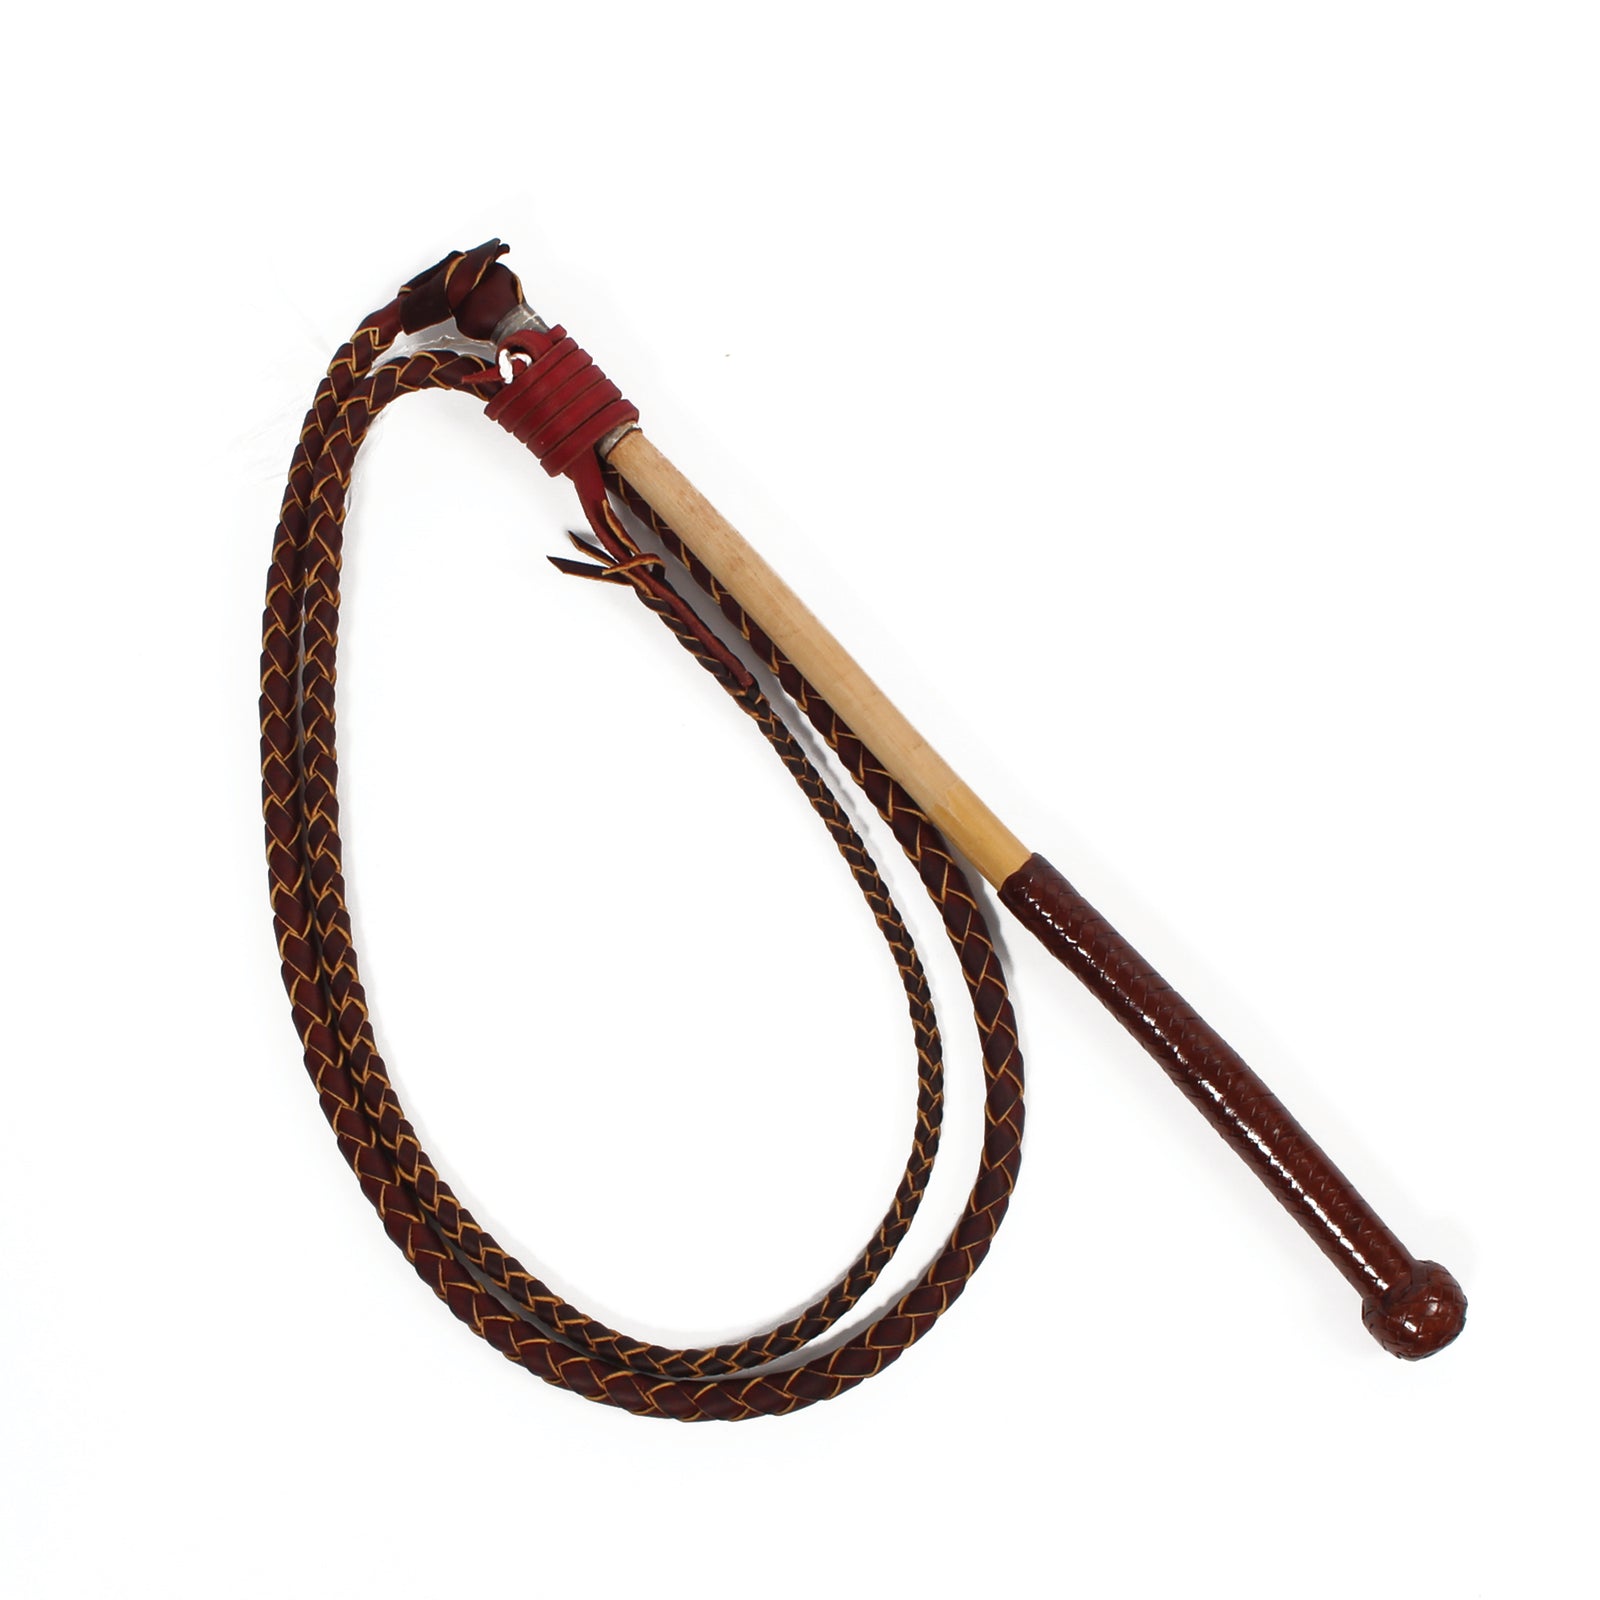 Australian Made 6ft Stockmans Whip - Red Hide